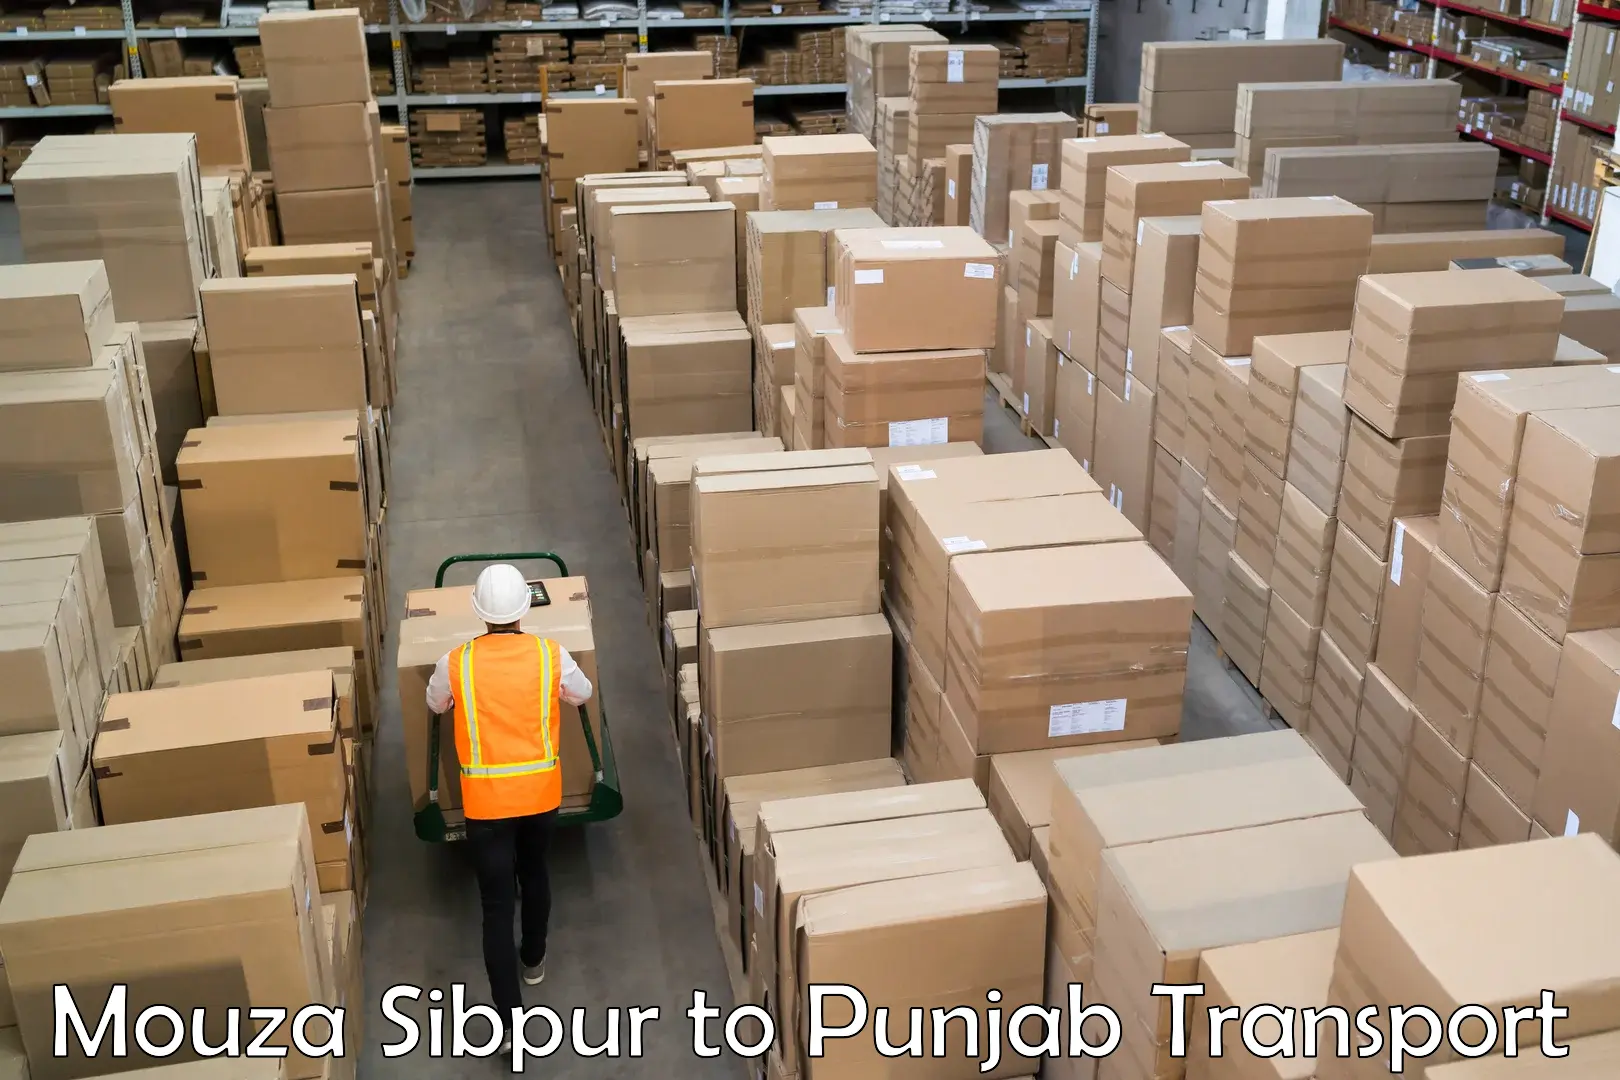 Express transport services in Mouza Sibpur to Amritsar